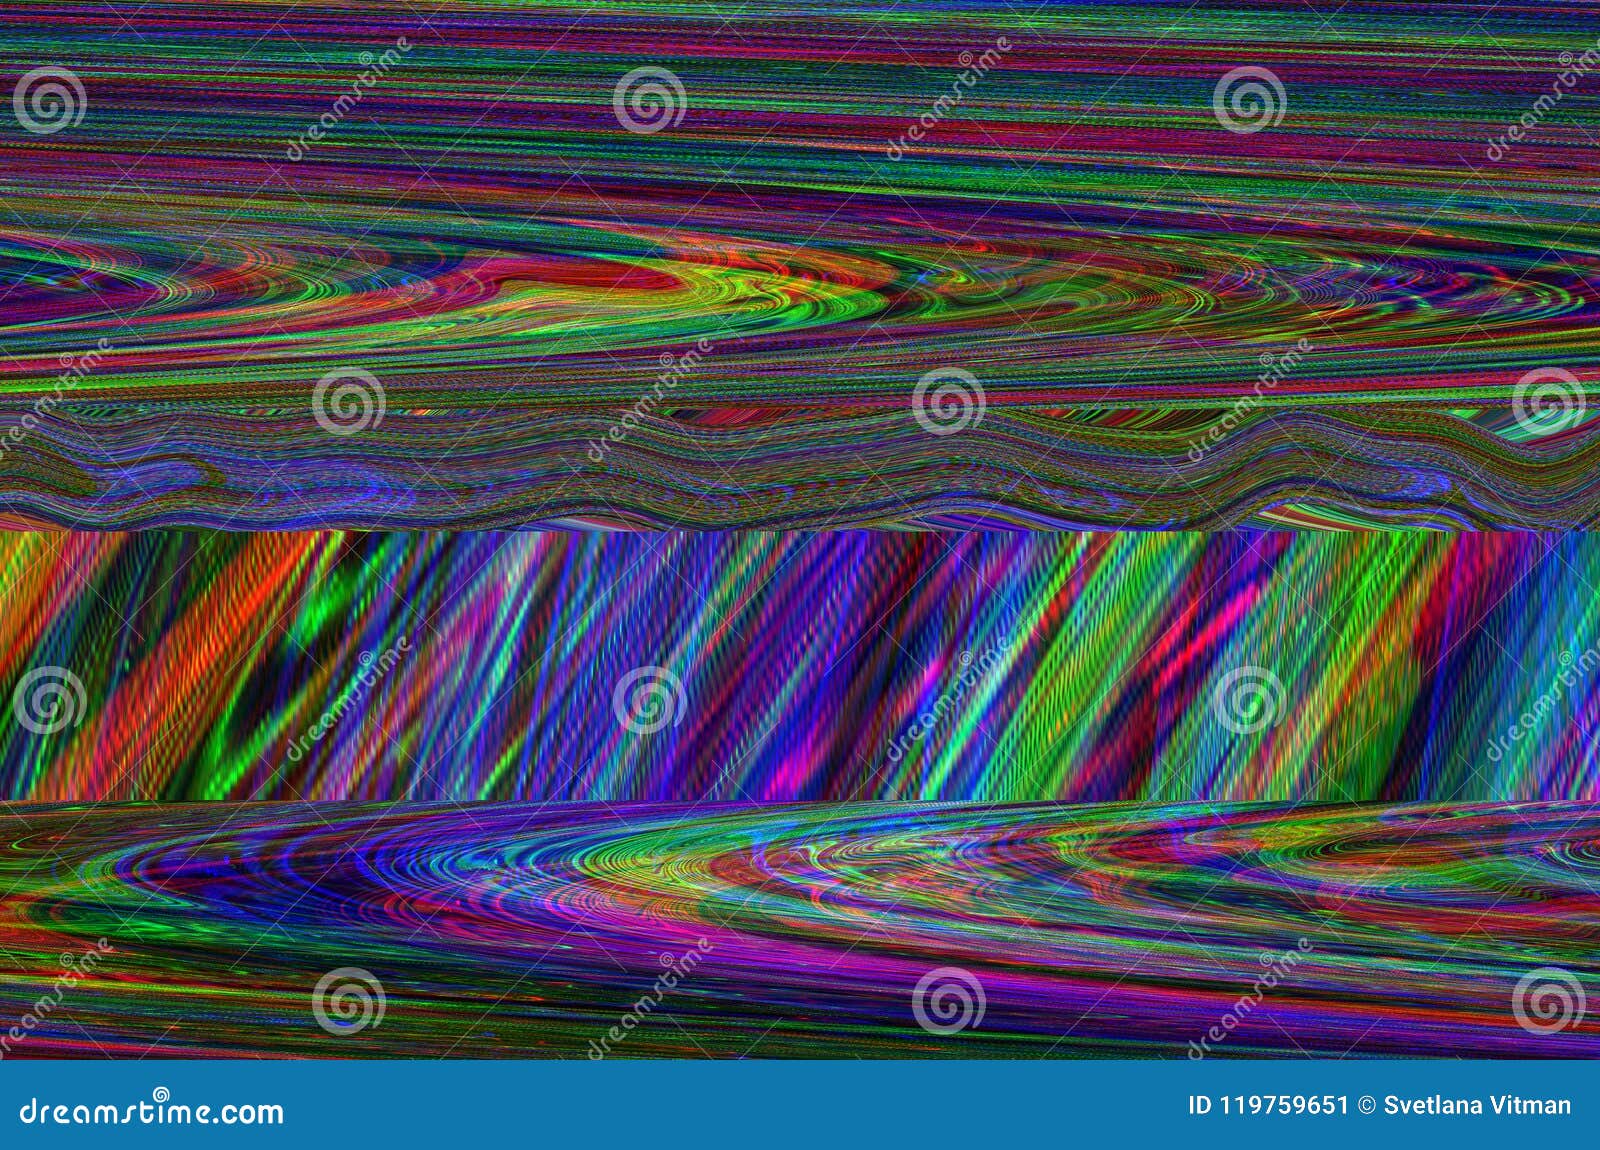 No Signal Screen With Glitch Background Wallpaper Image For Free Download   Pngtree